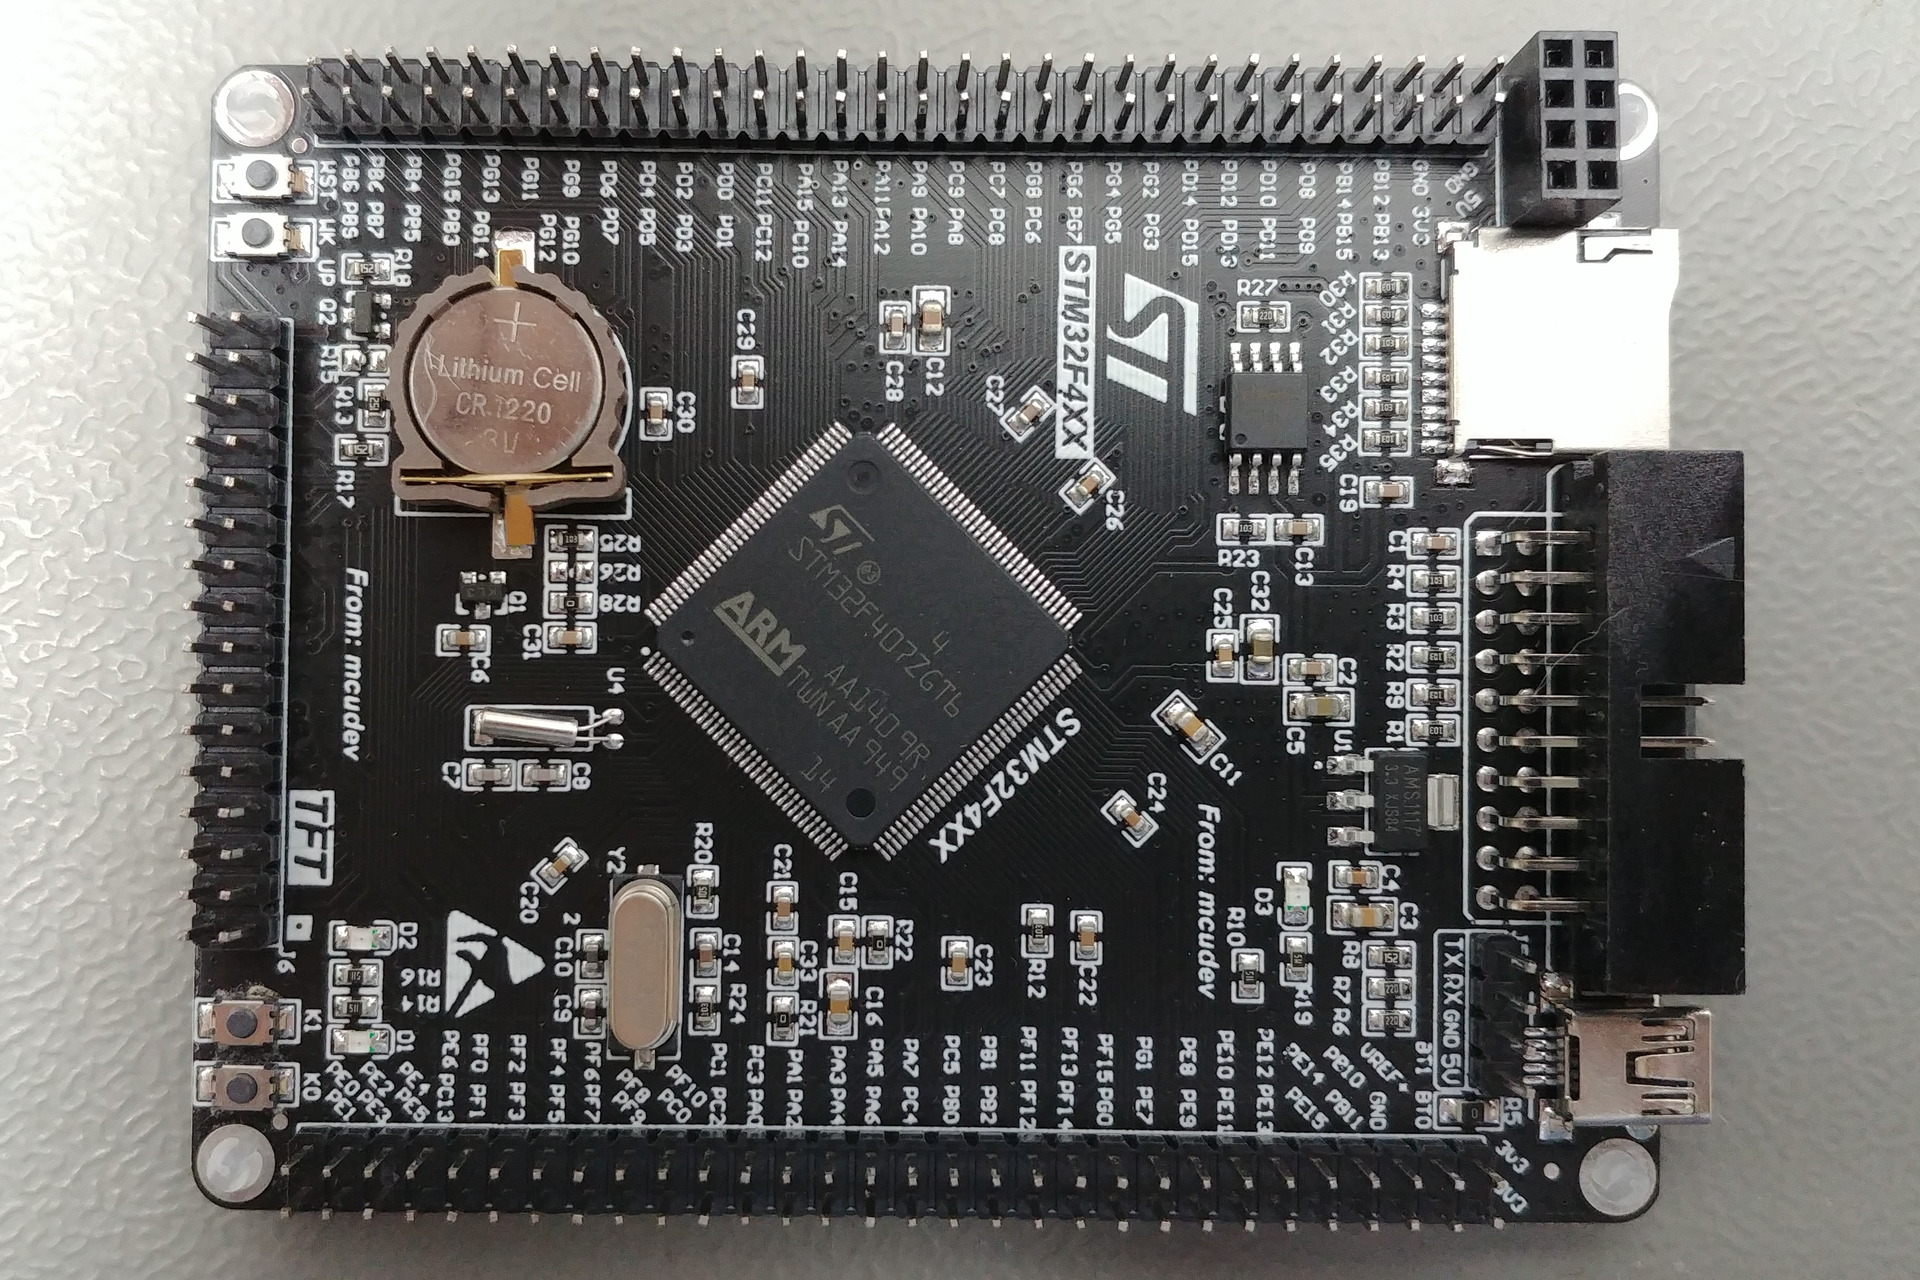 STM32F4XX: Top view.